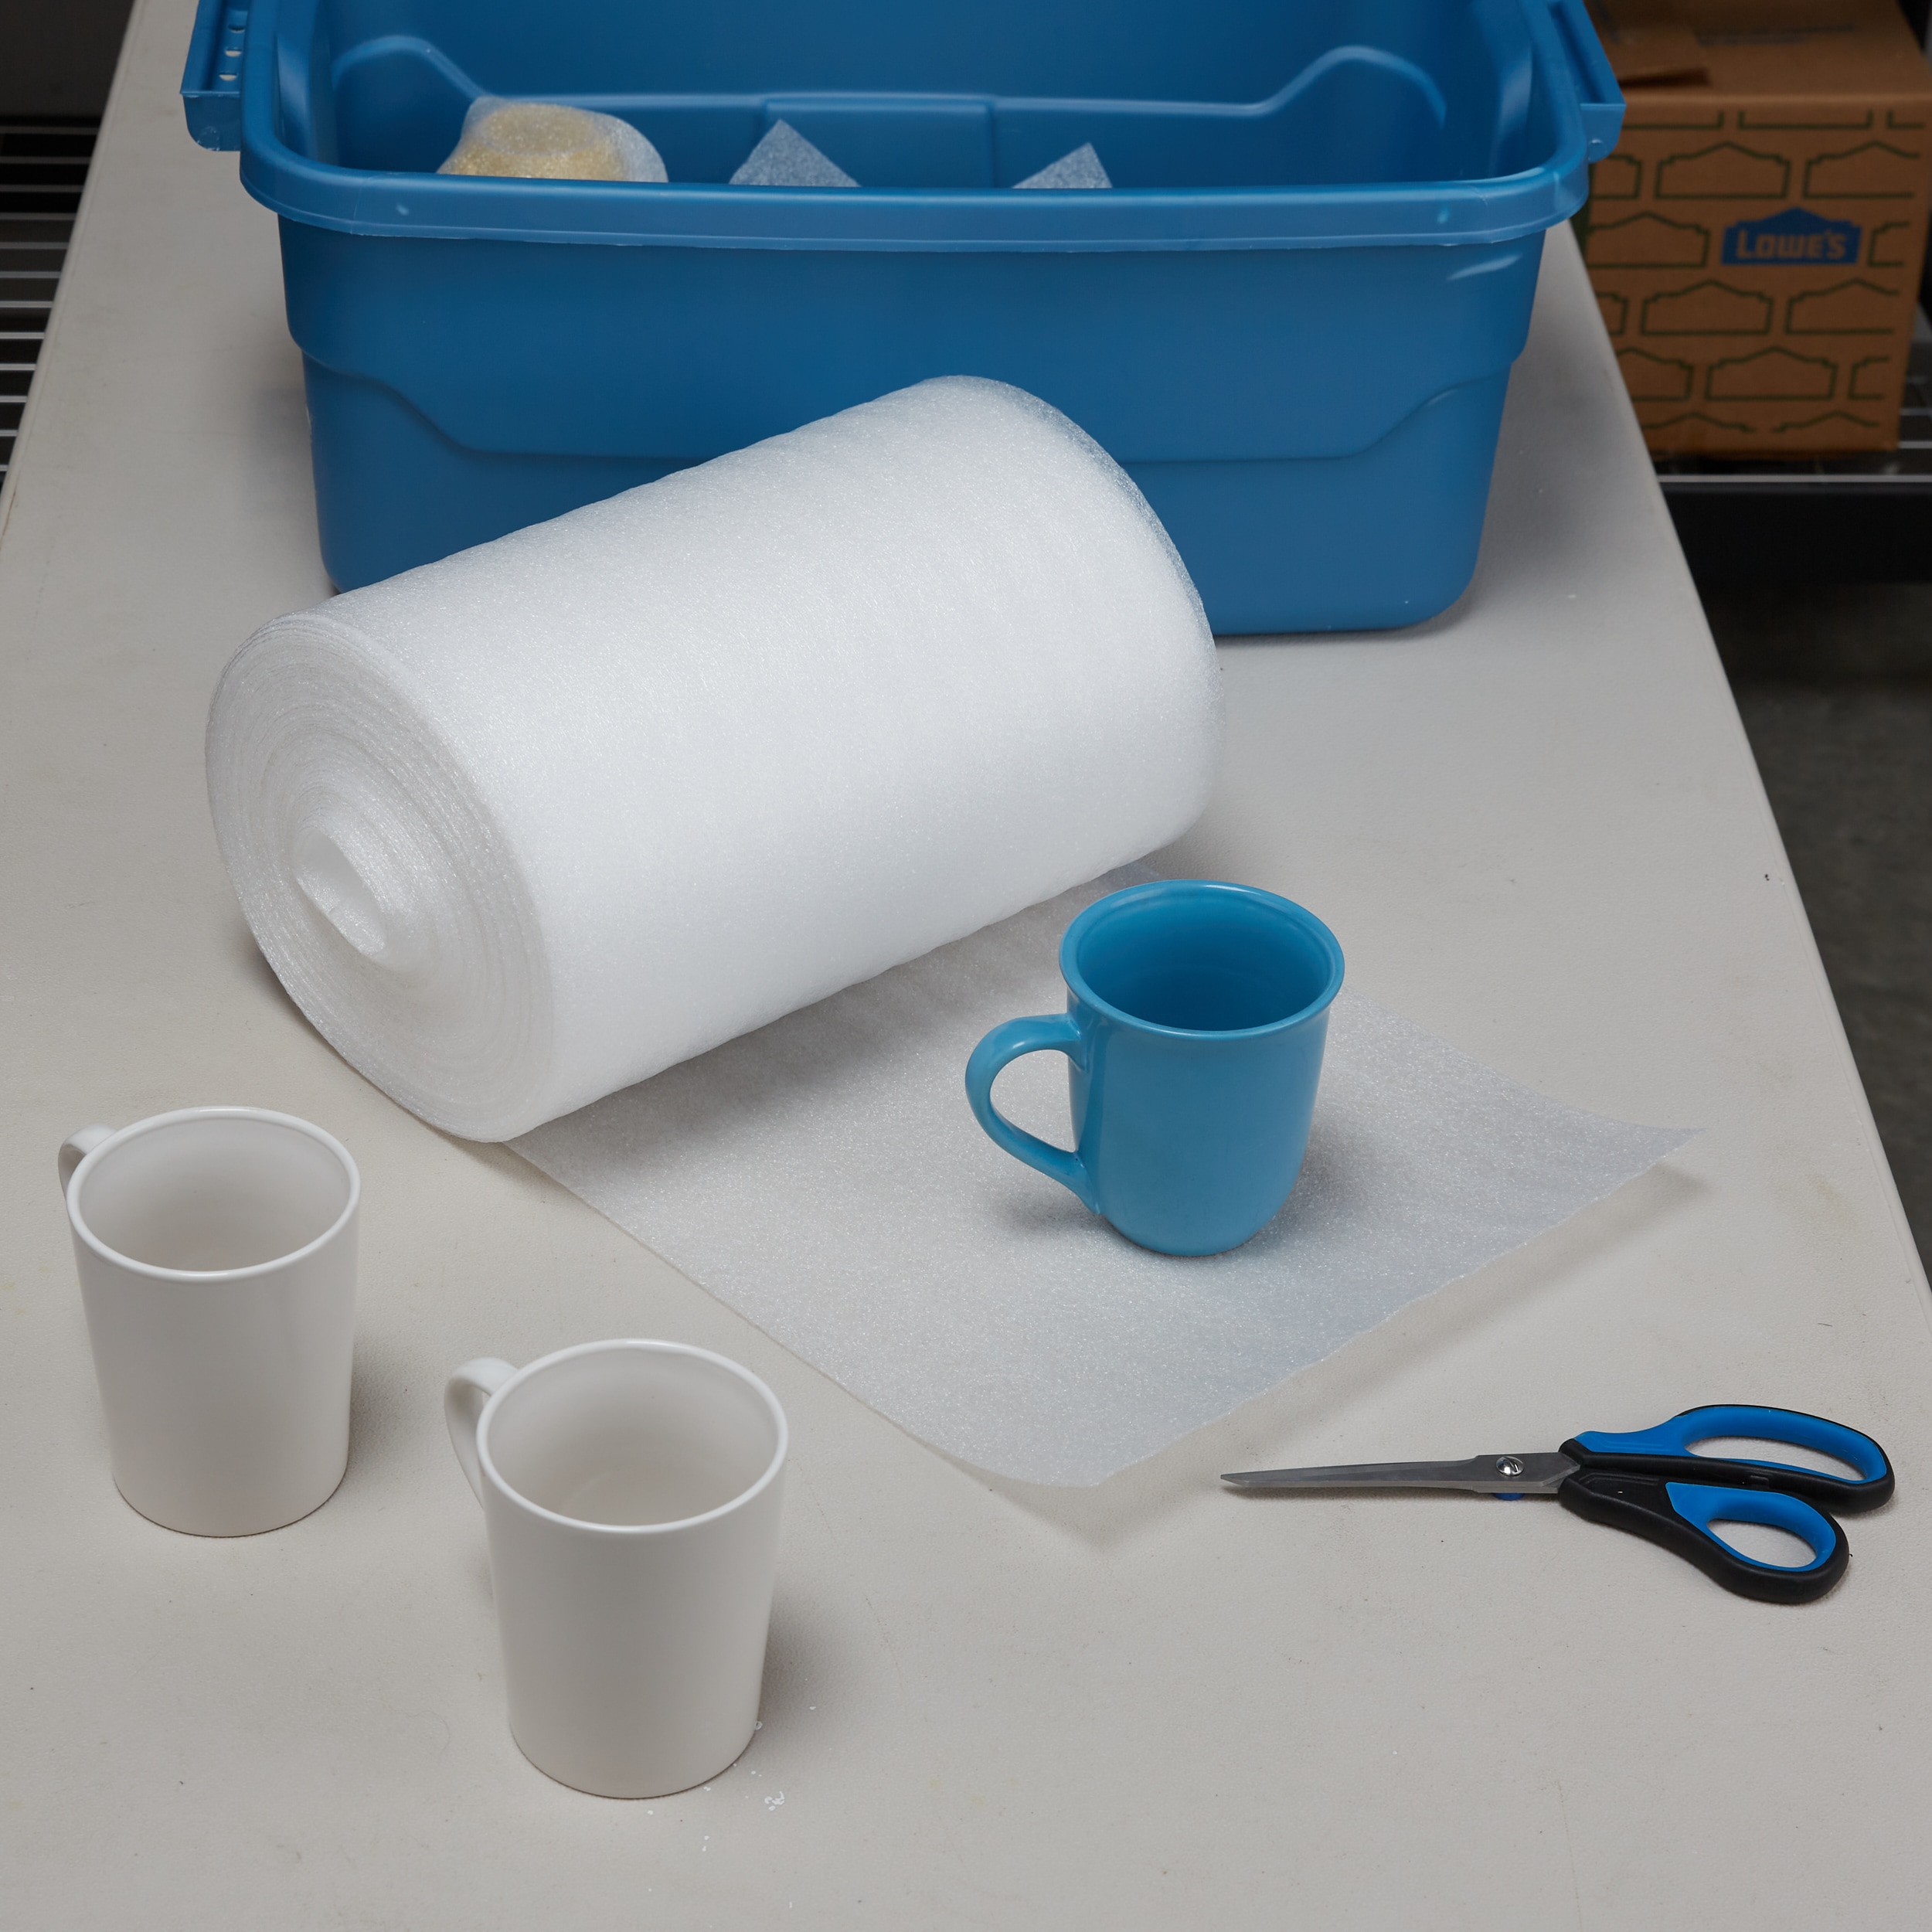 The Best Packing Materials: Styrofoam & More Guide